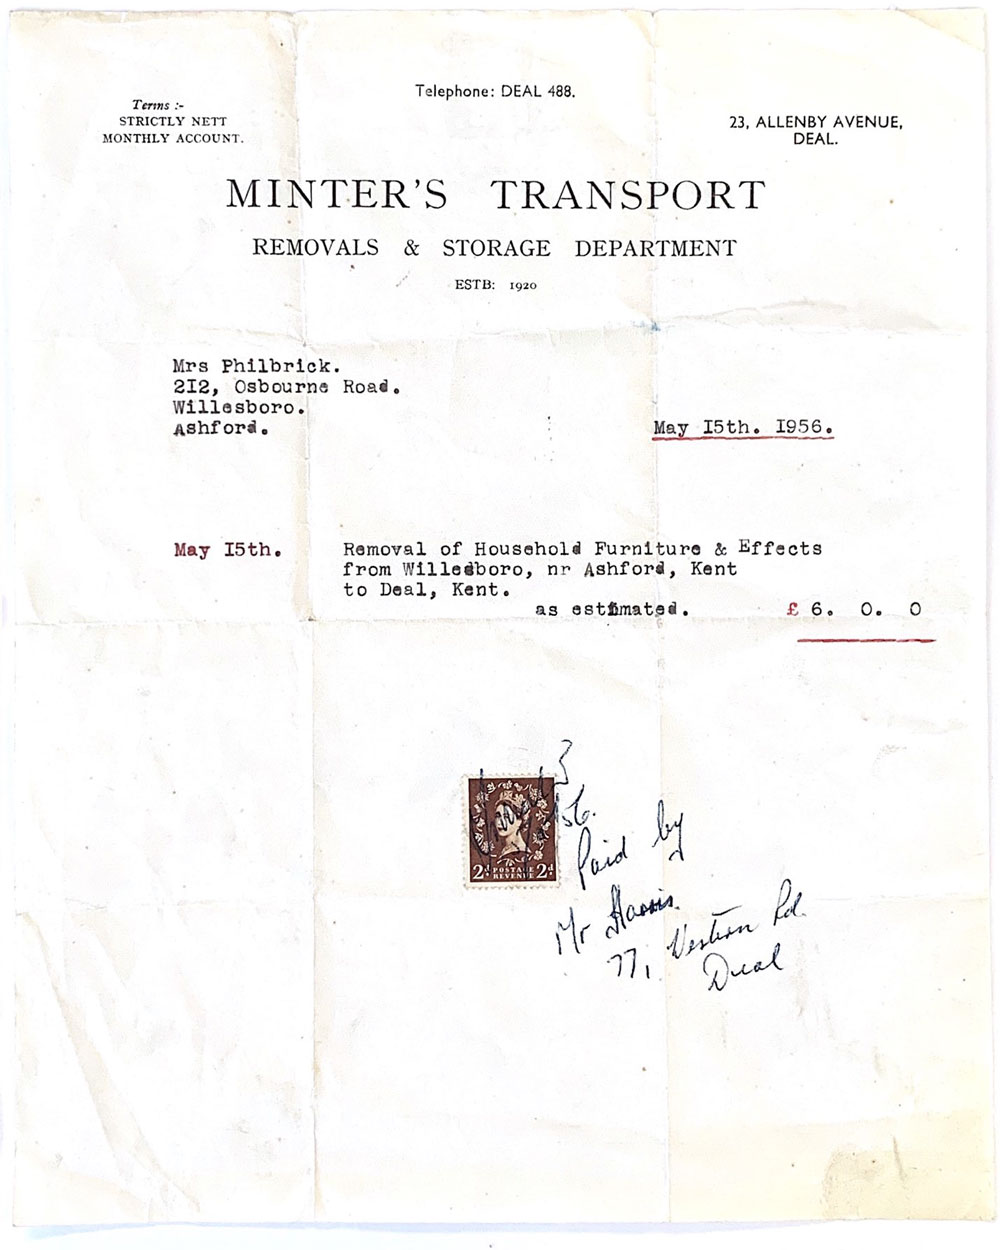 Image of an invoice from 1956 - Minters of Deal